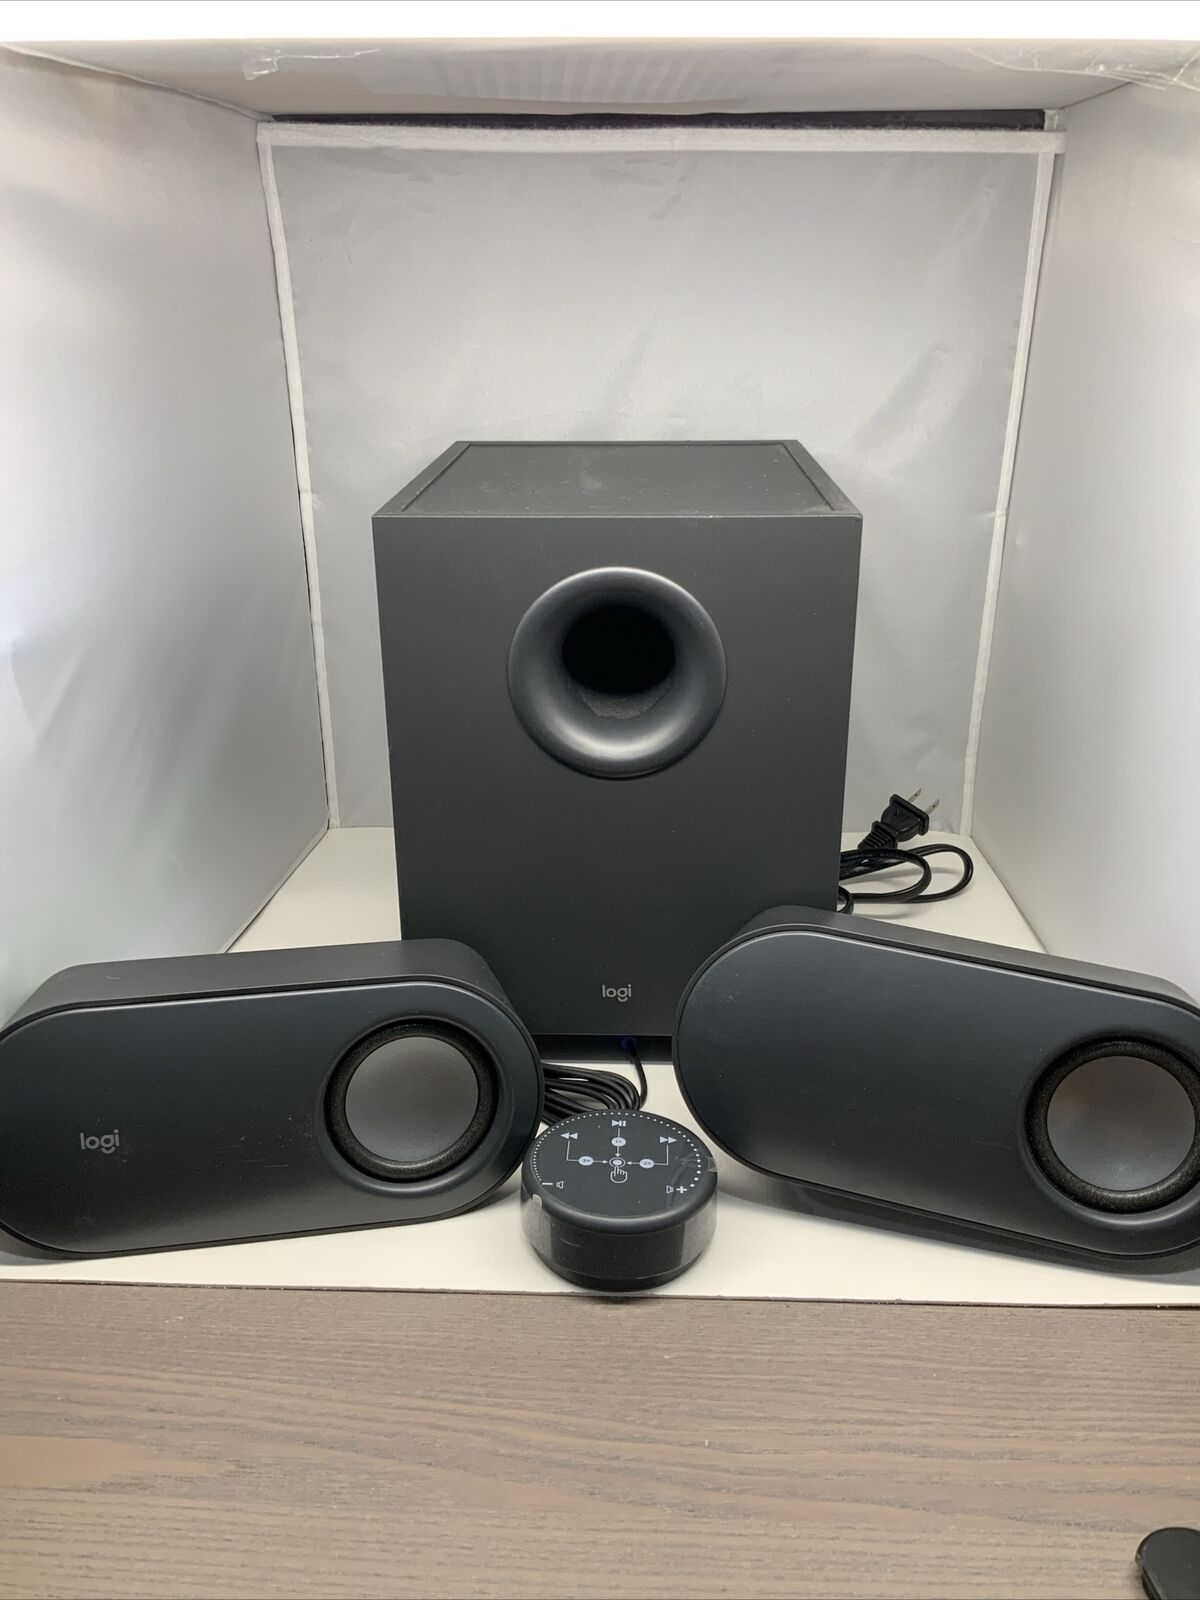 Logitech - Z407 Bluetooth Computer Speaker System with Wireless Control TESTED